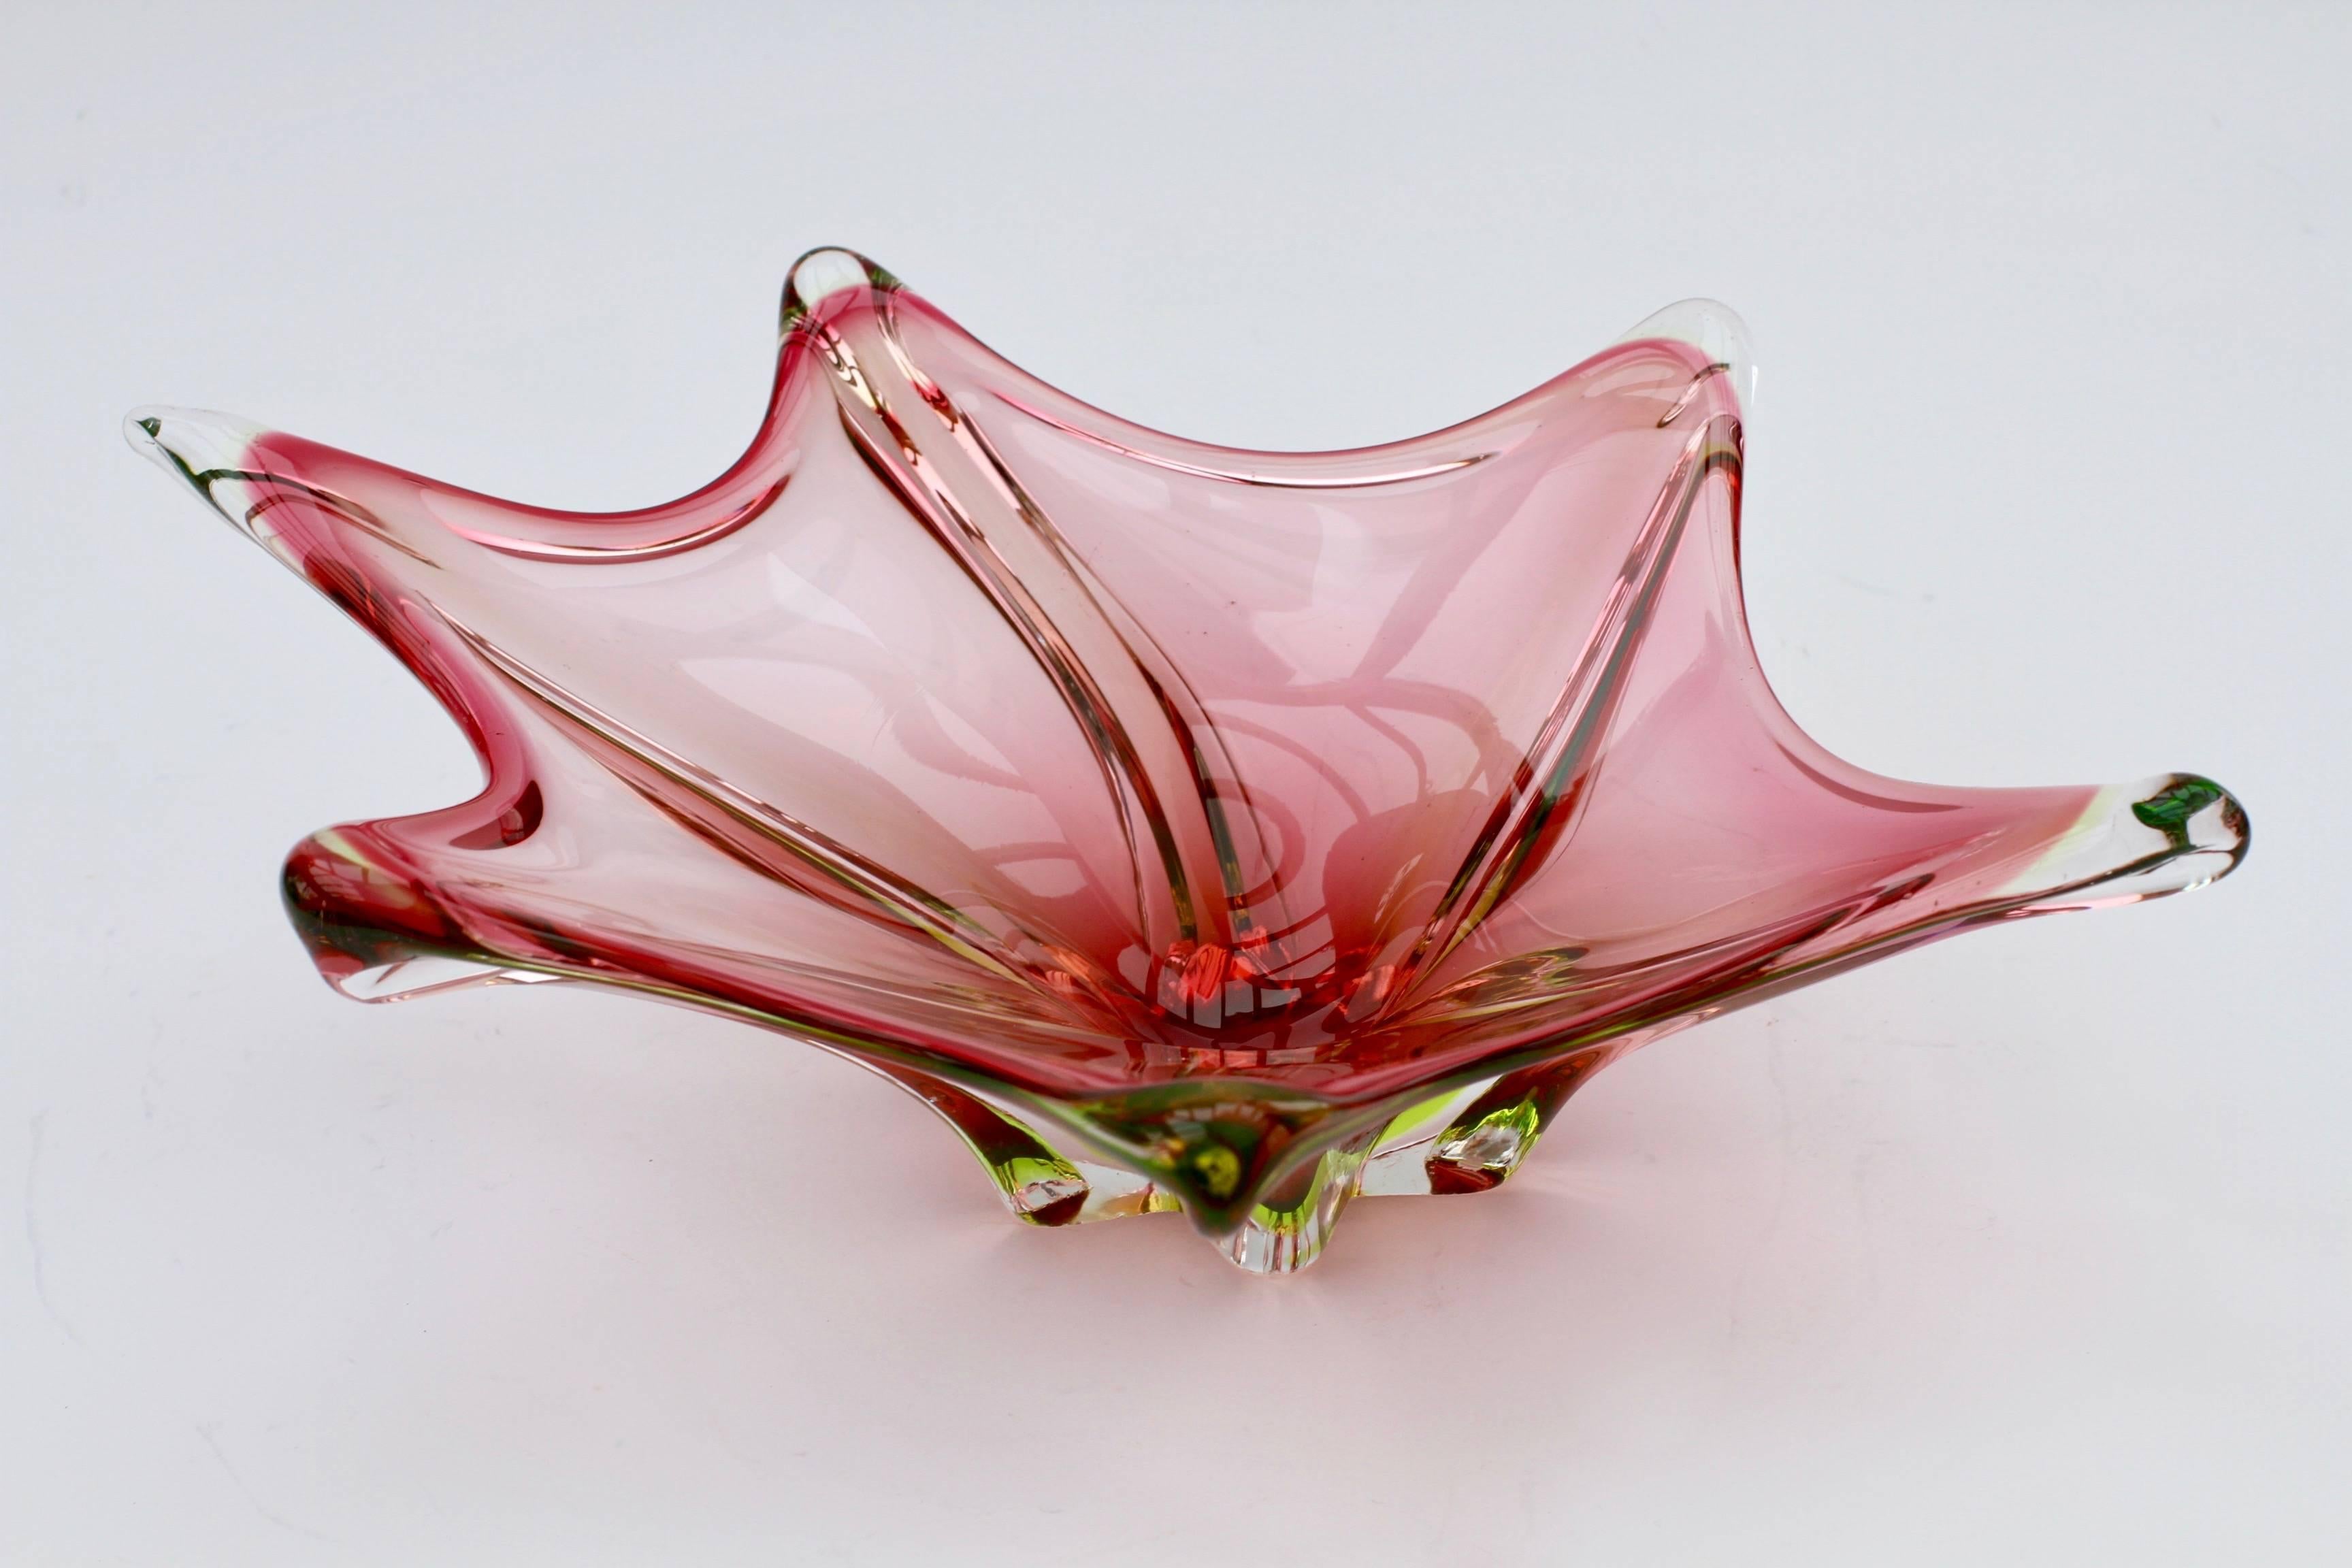 Mid-Century Modern Vintage Mid-Century 'Webbed' Murano Pink and Green Sommerso Glass Bowl c. 1950s